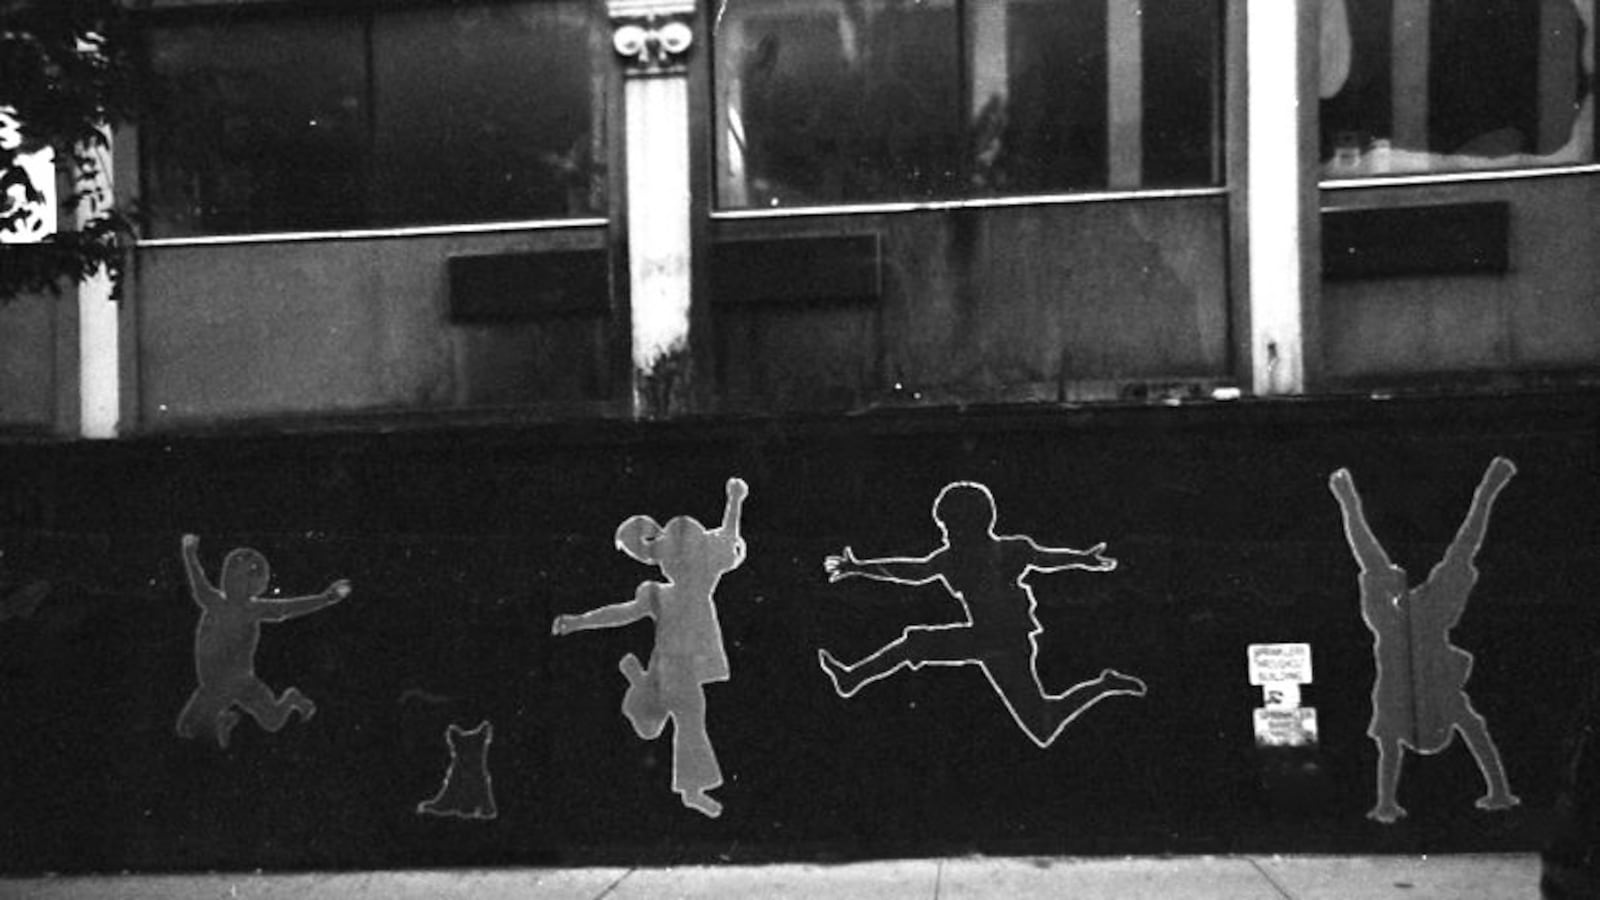 A black and white photo of a mural featuring the silhouettes of kids playing.